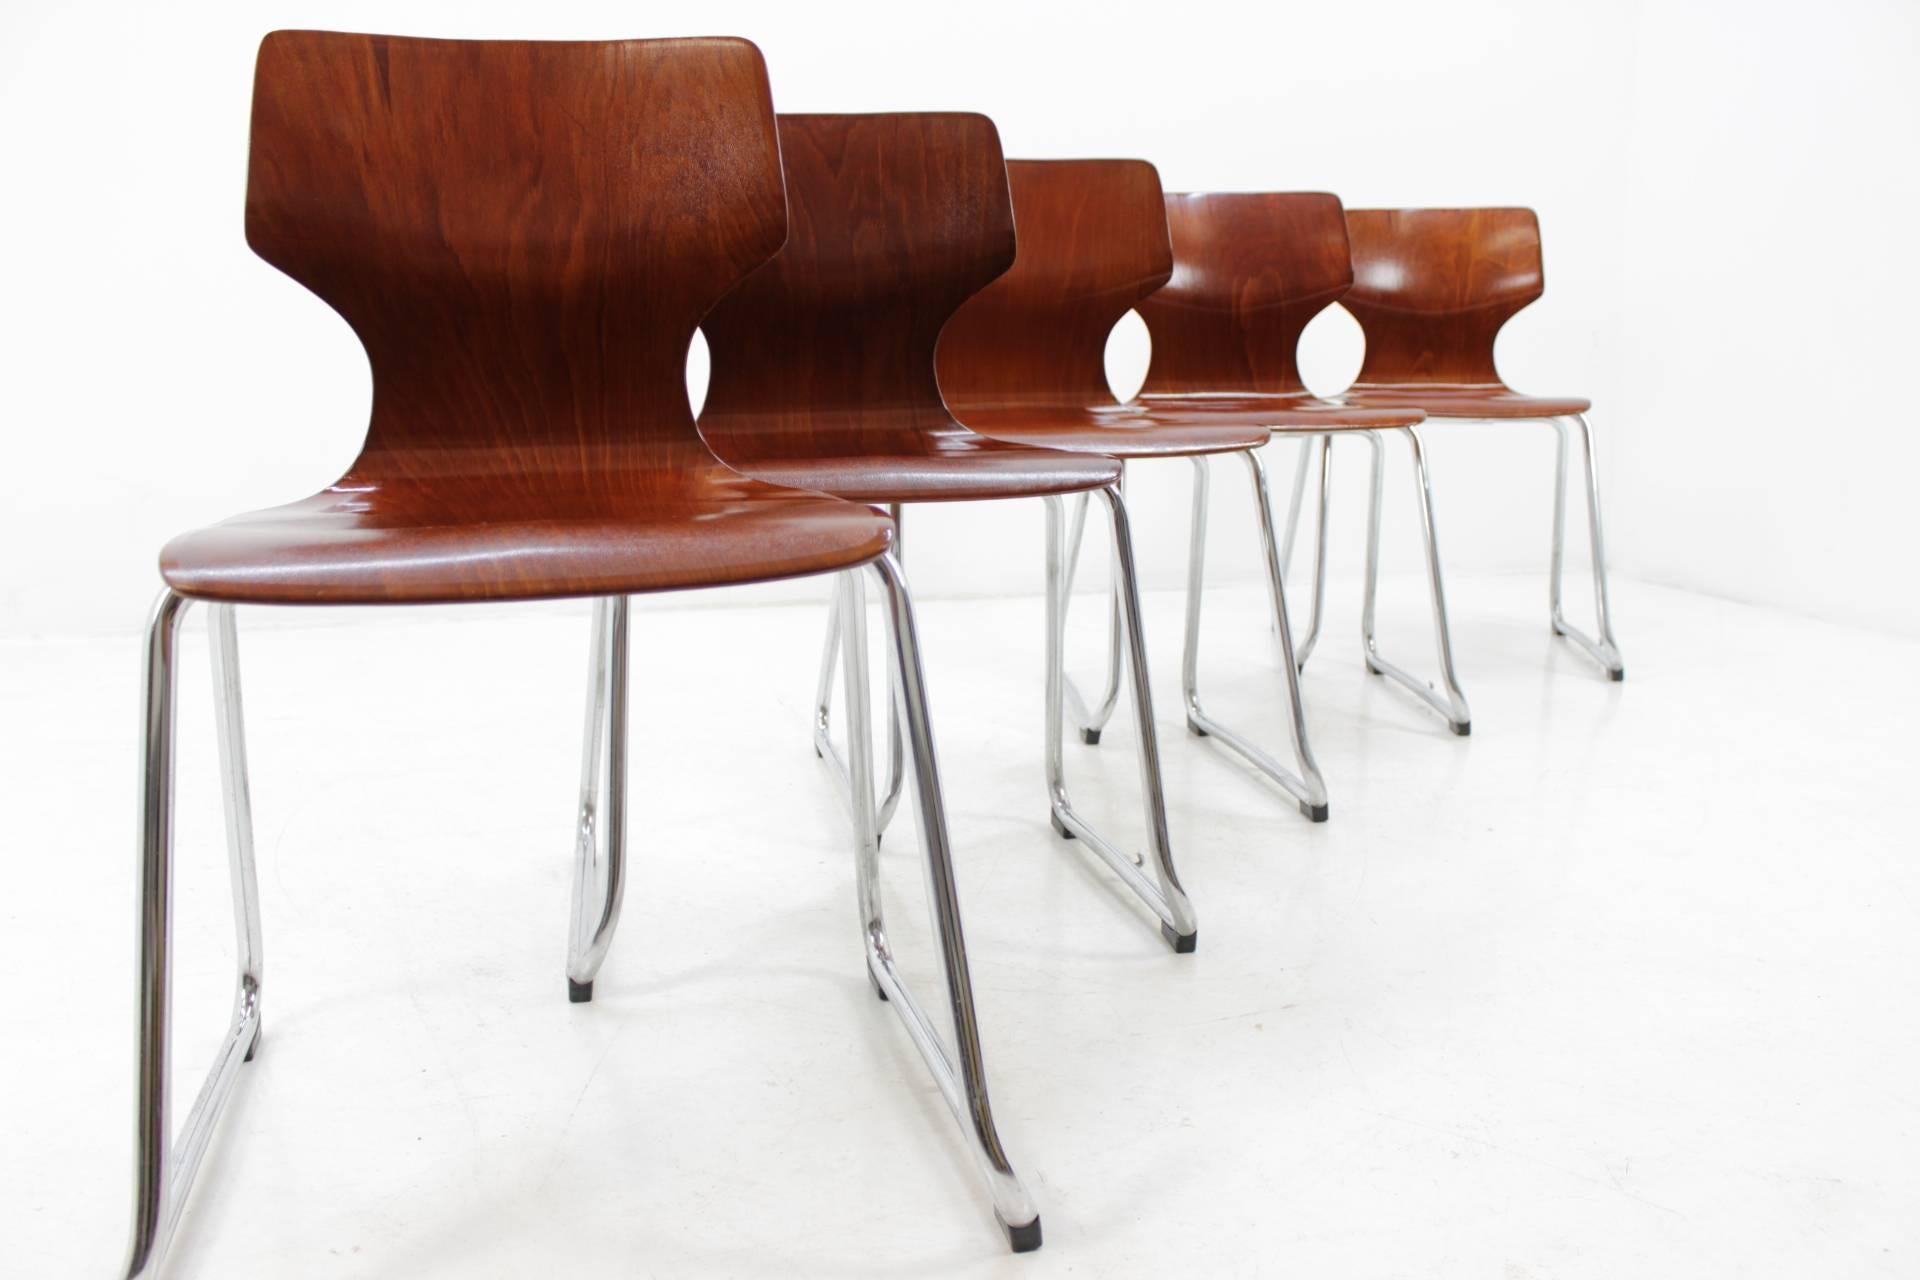 Late 20th Century Set of Ten Design Dining Chairs, Flötotto